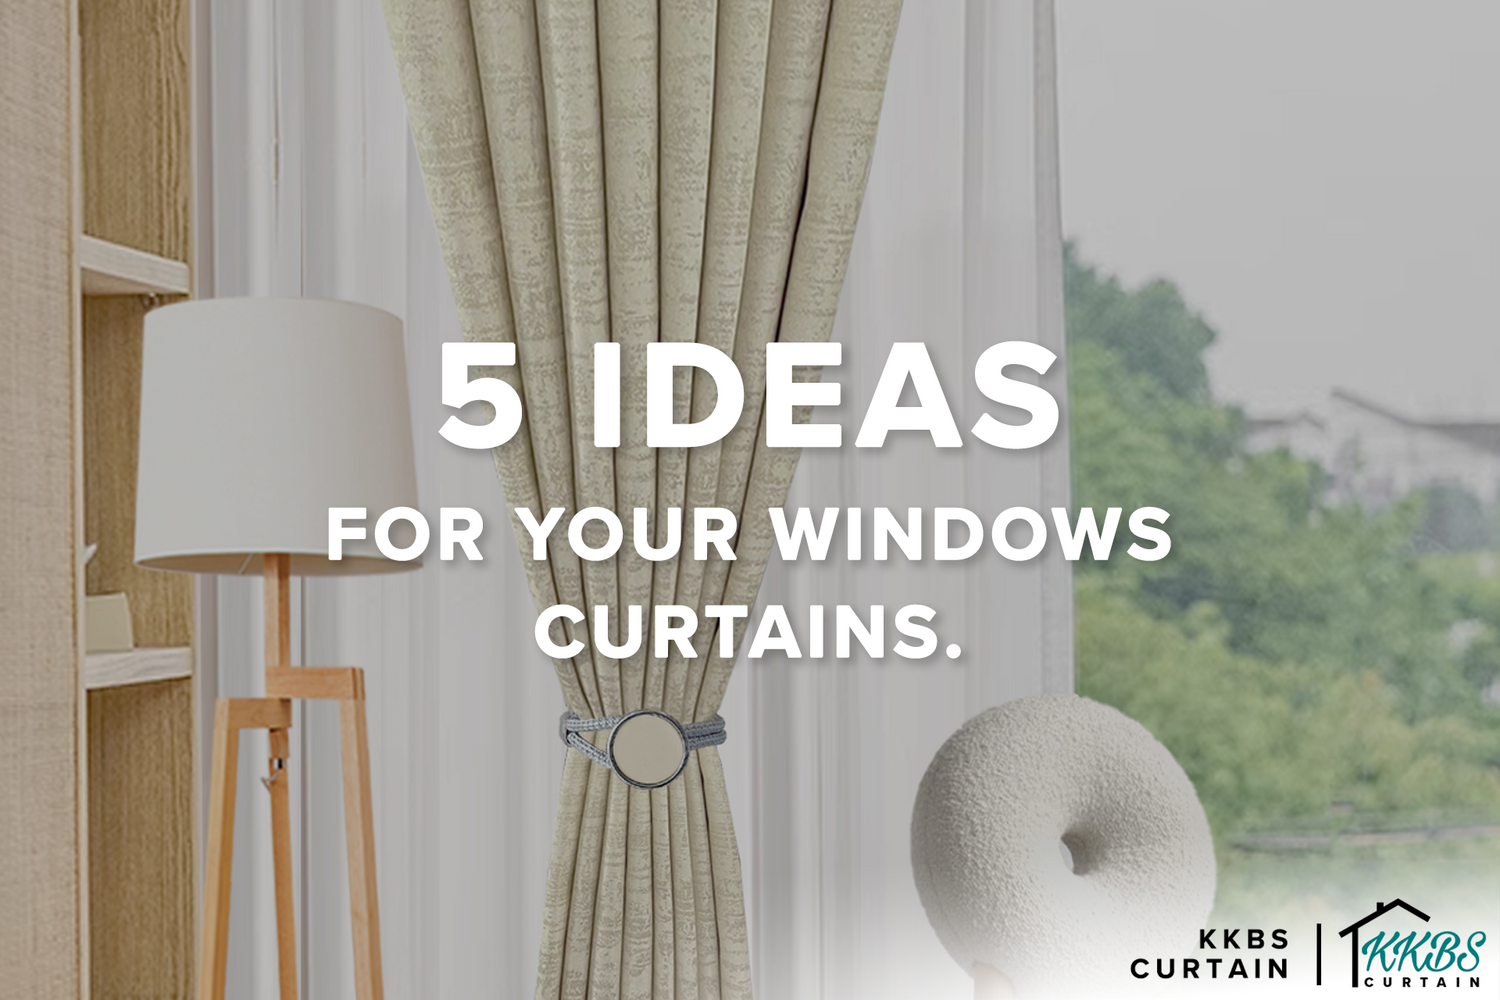 5-ideas-for-your-windows-curtains